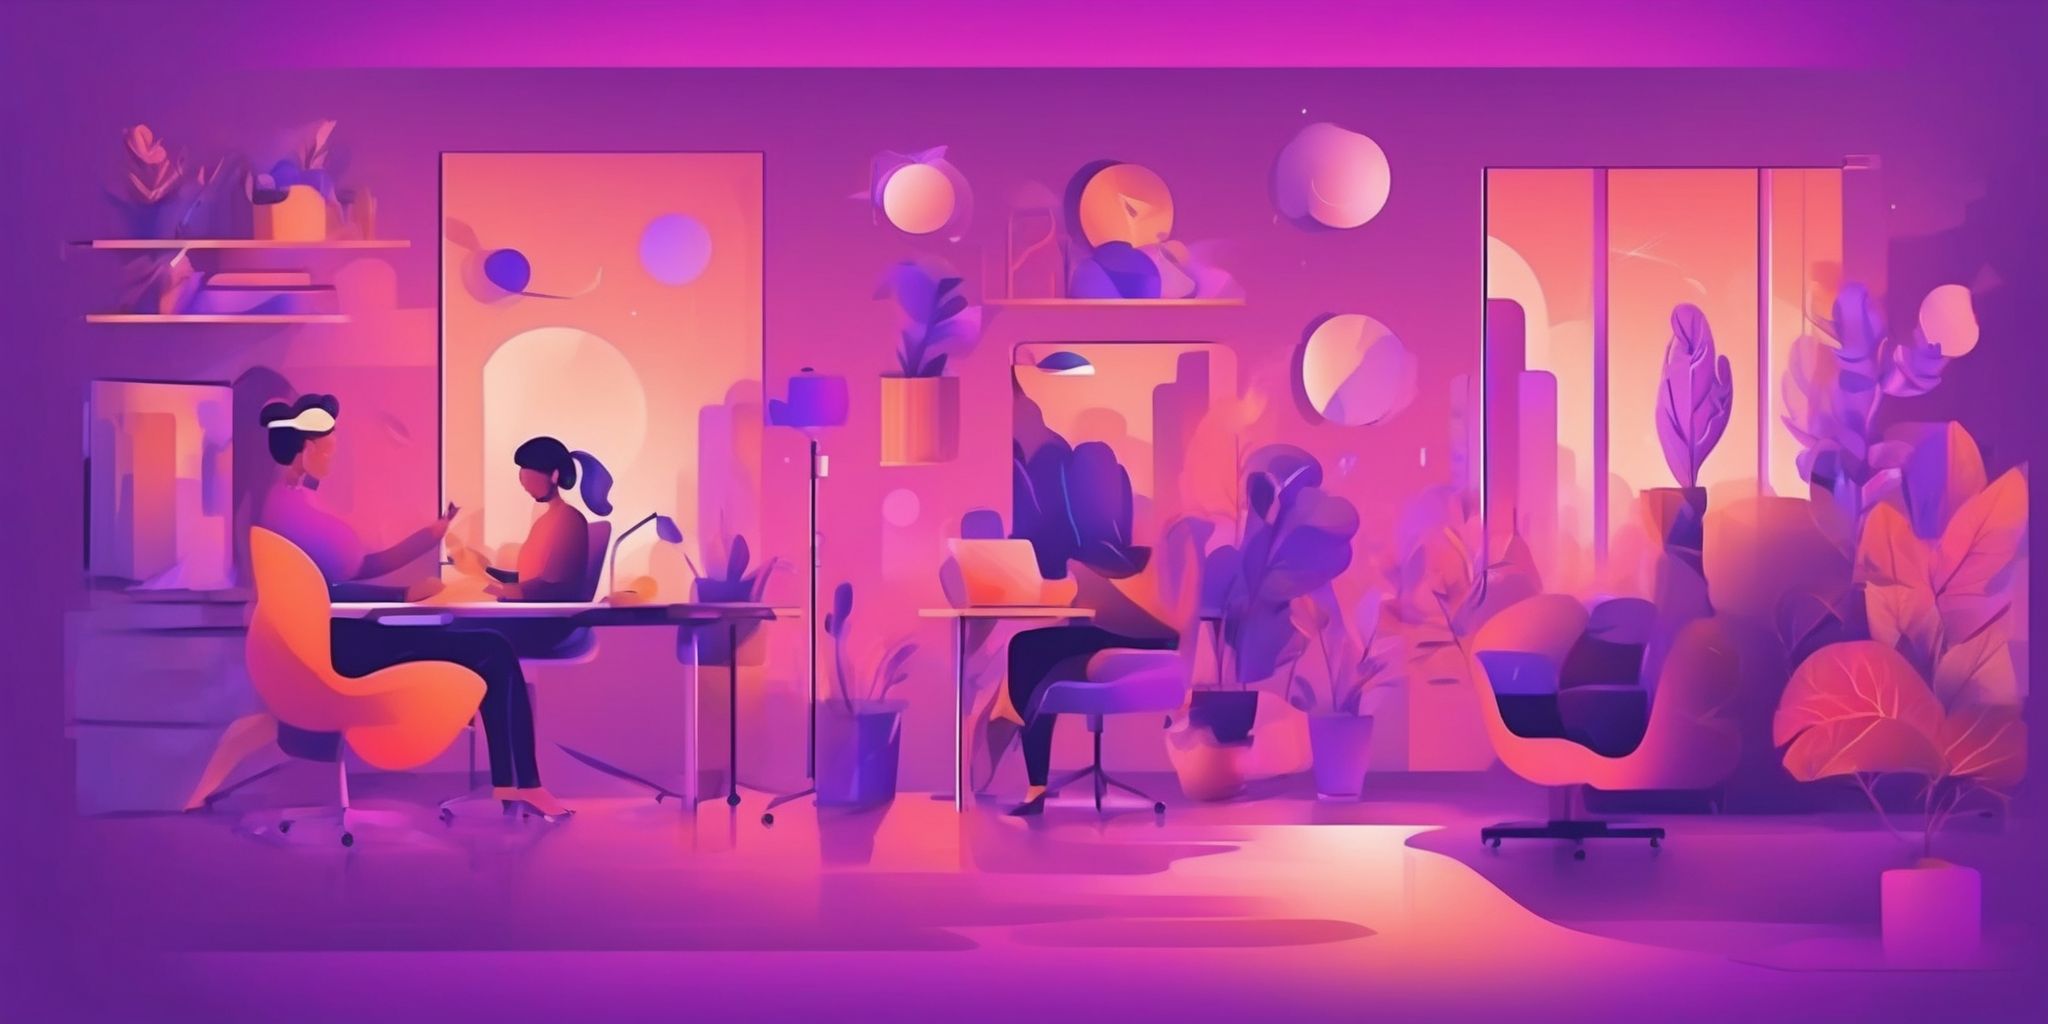 Activity in flat illustration style, colorful purple gradient colors